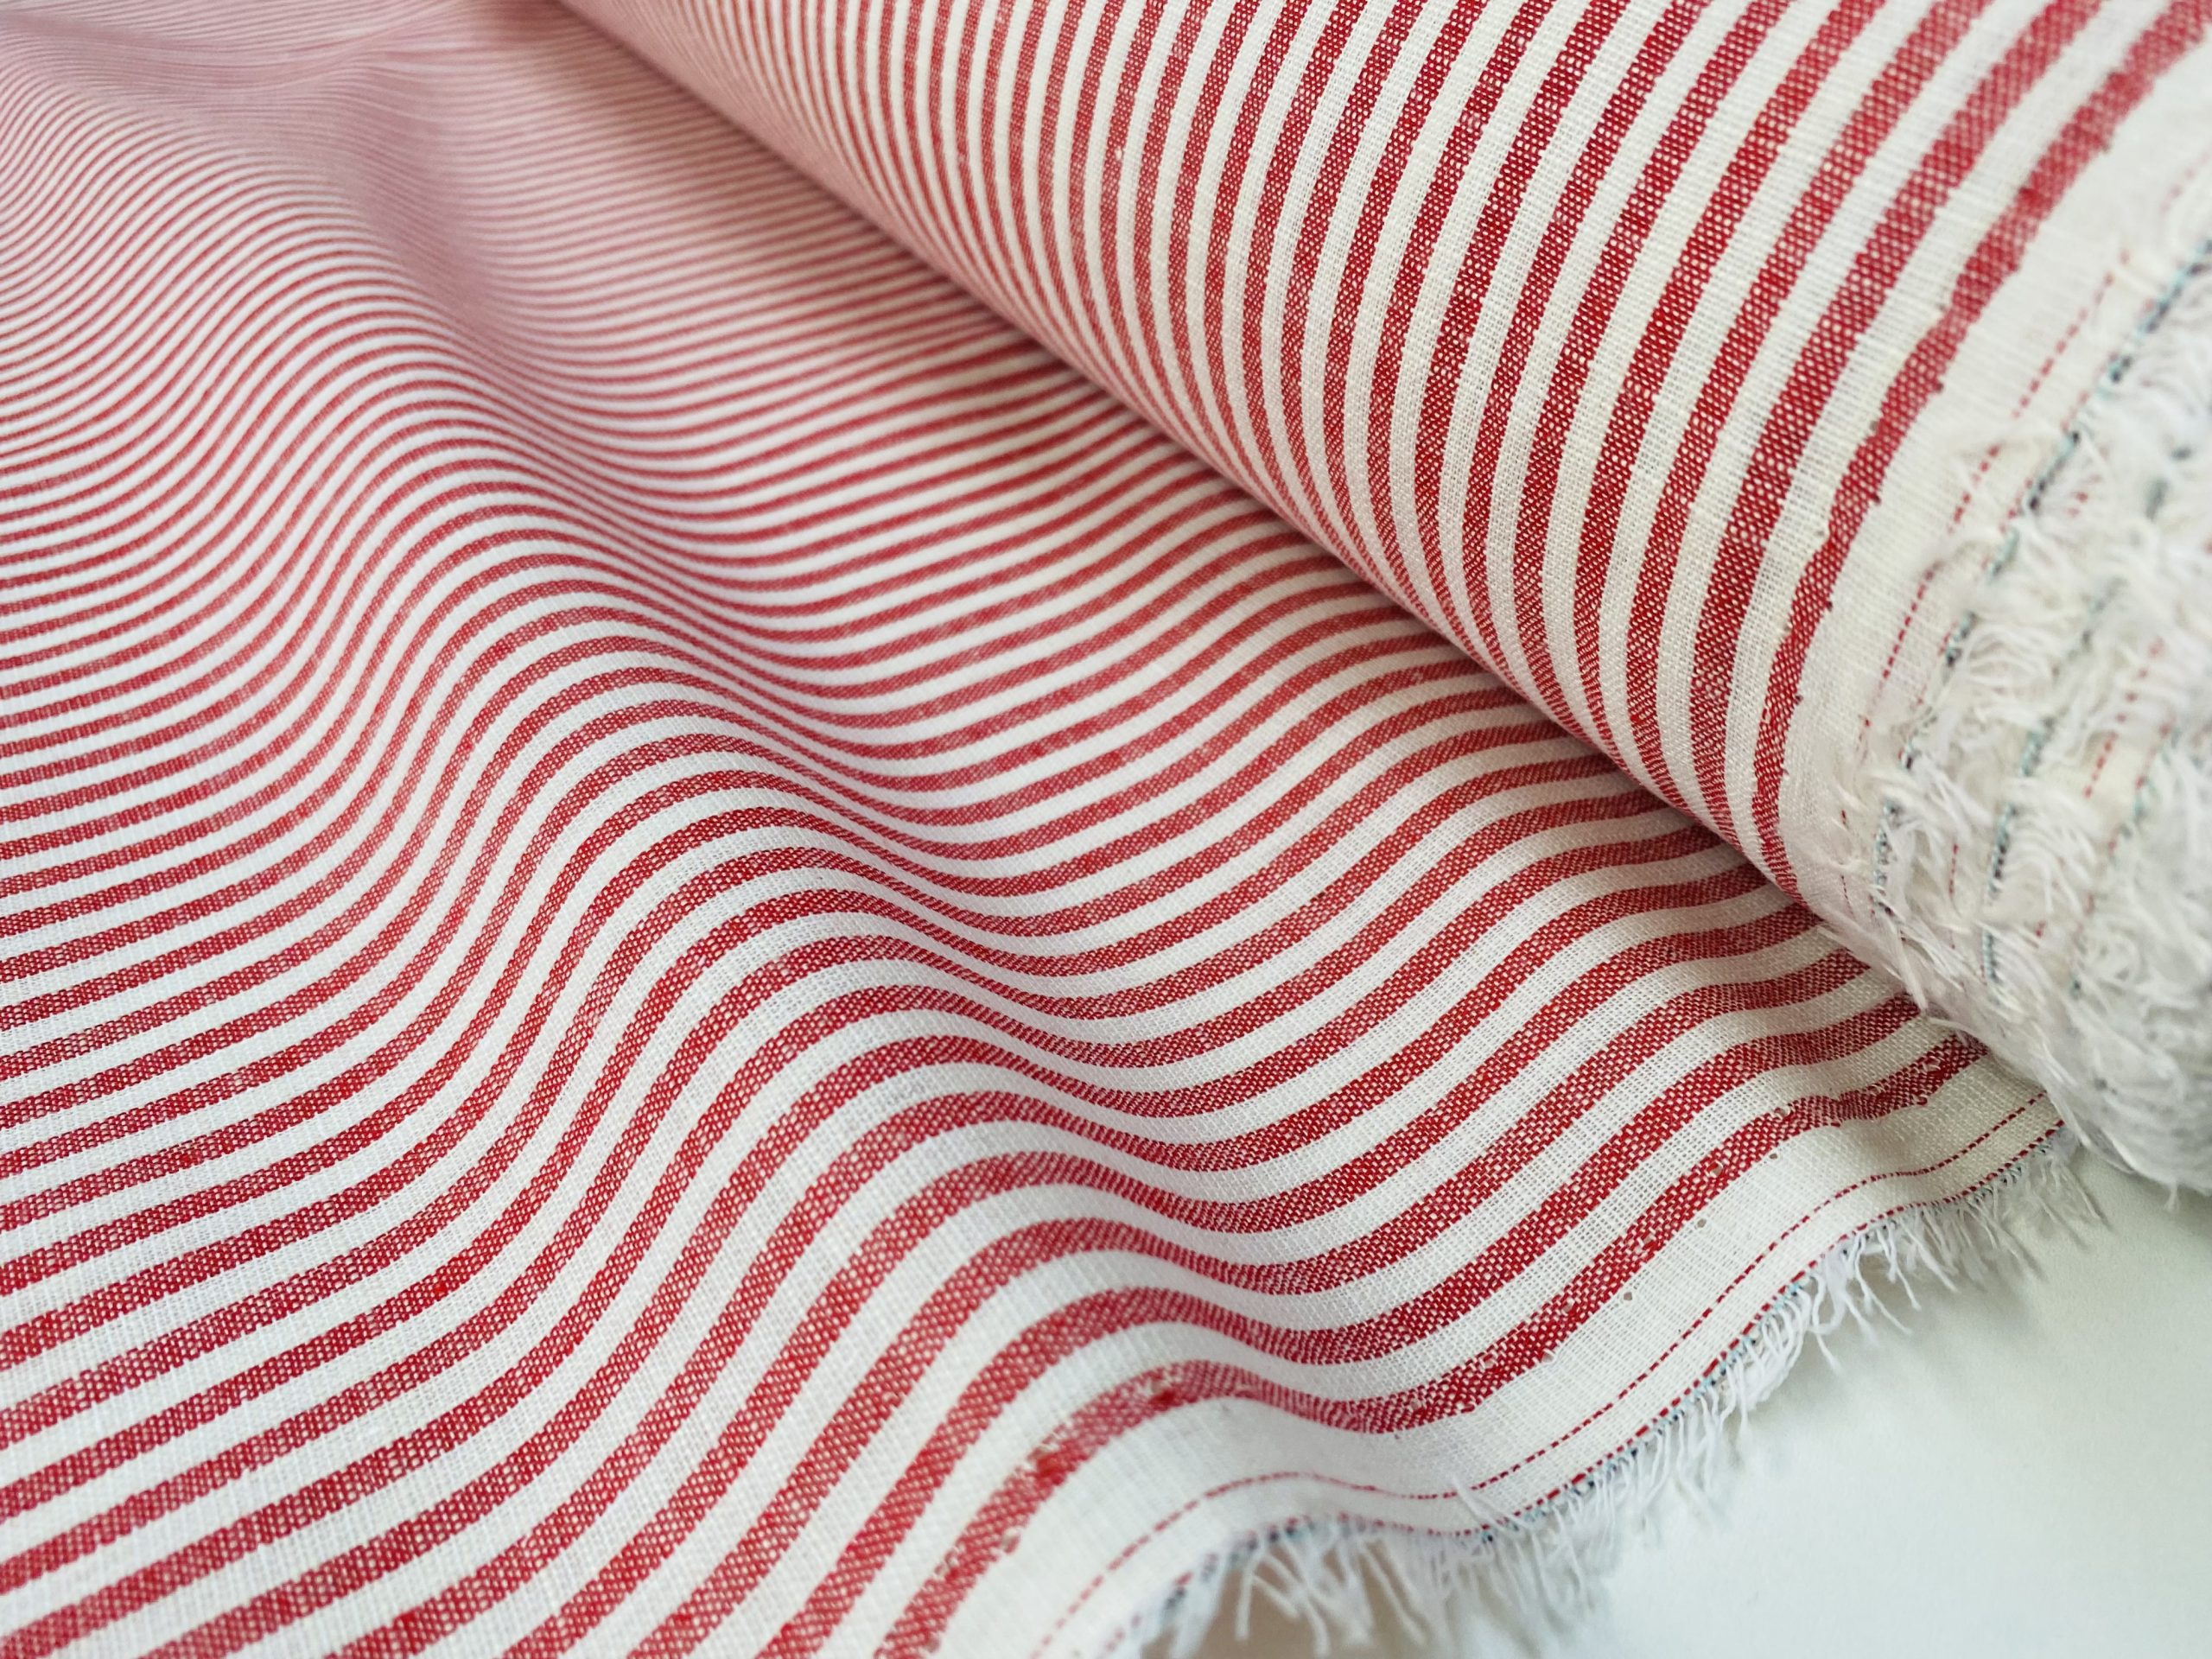 Candy Stripe Linen Fabric Light Cotton Material Cute Striped White Linen  Home Decor, Dressmaking - 59 or 150cm wide - Red